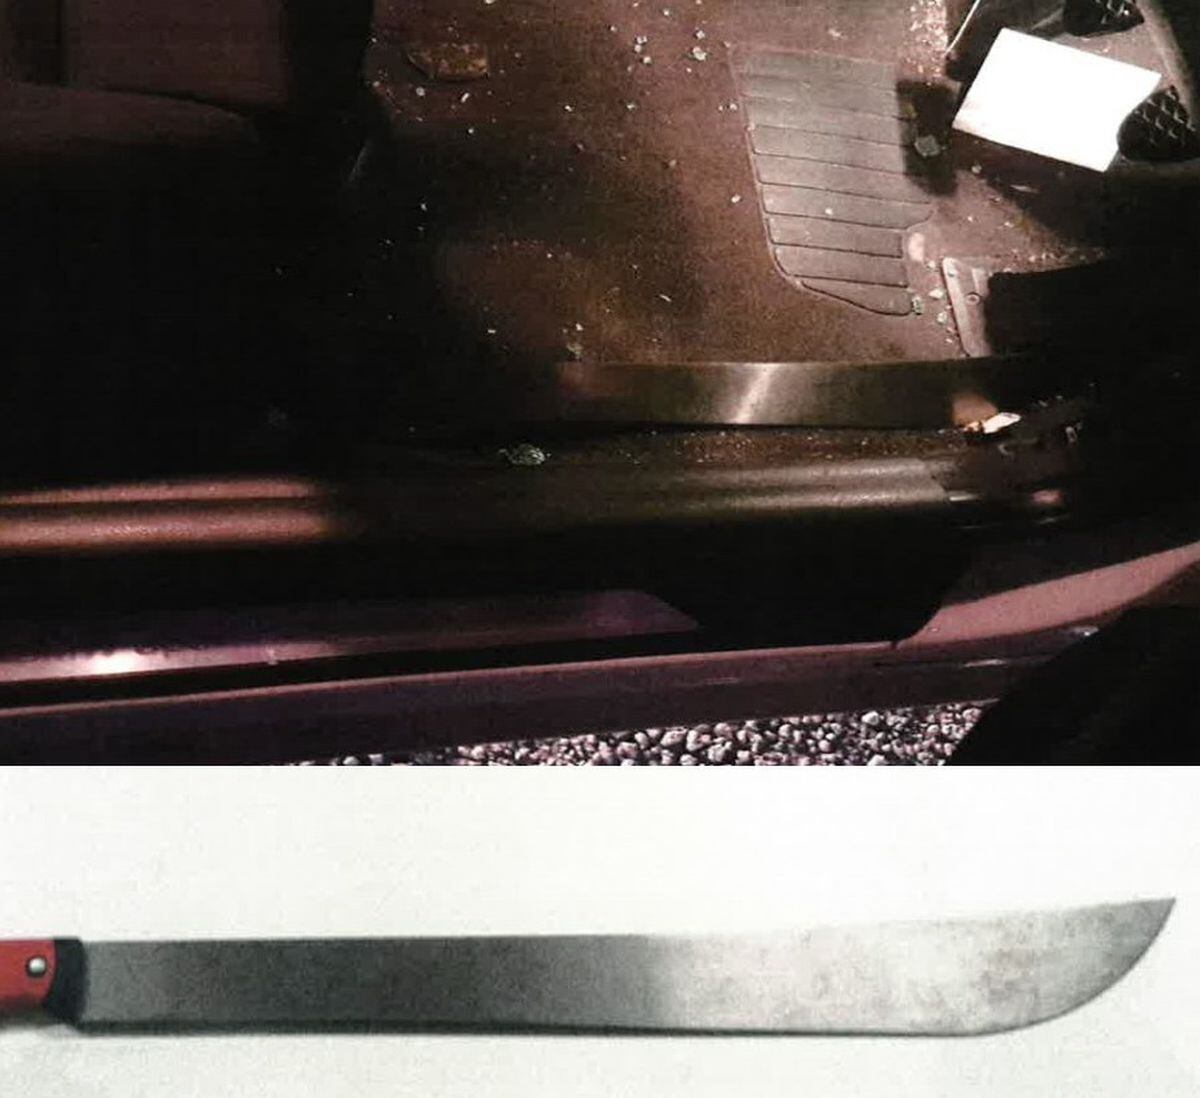 The machete seized from Brown and (top) where police found it in his car